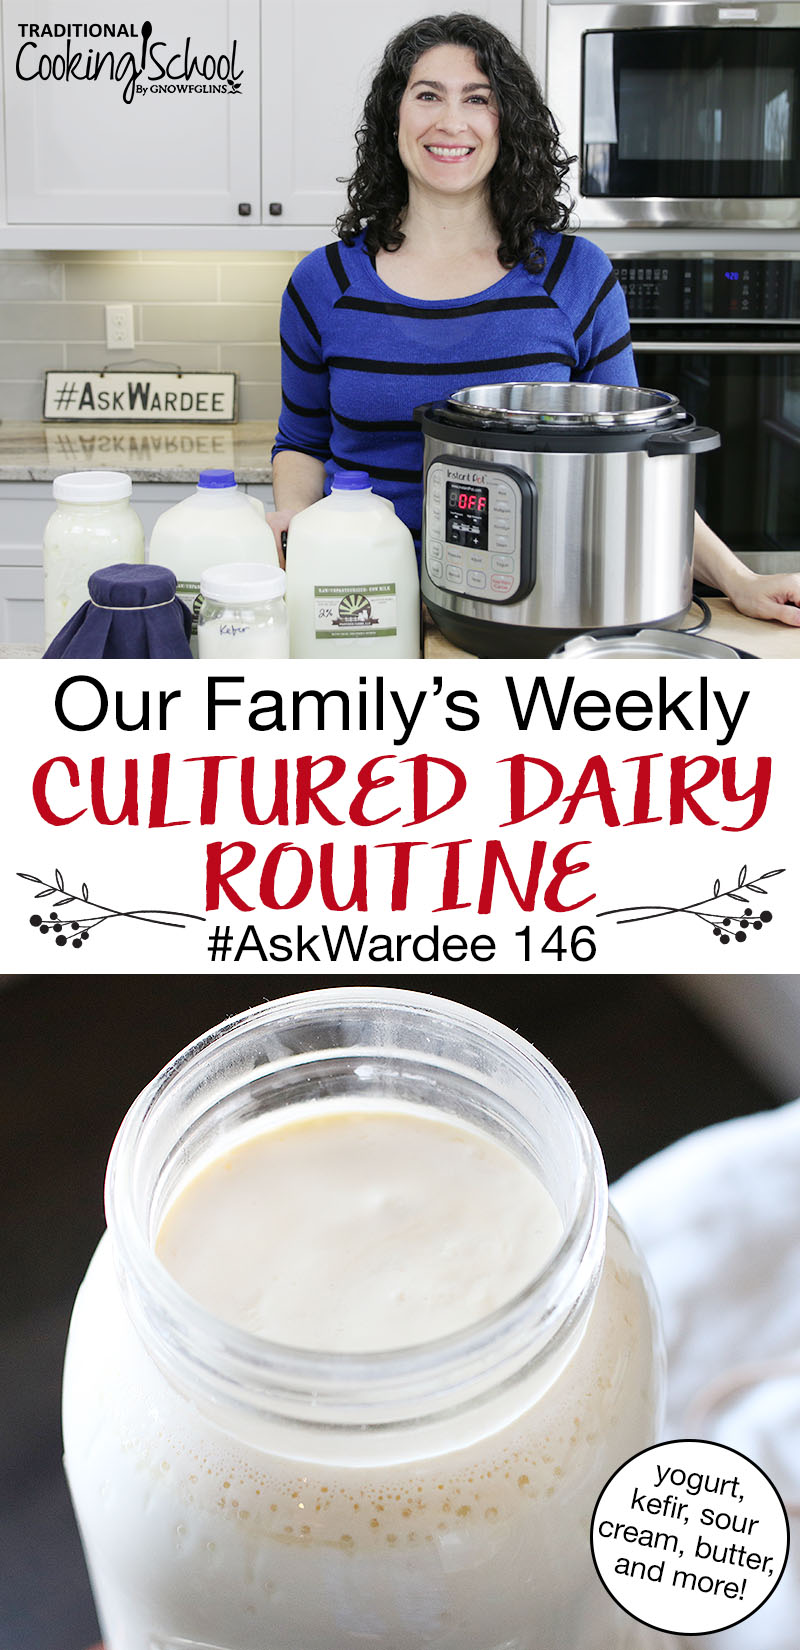 photo collage of kefir and a smiling woman standing in a kitchen with gallons of raw milk and and Instant Pot in front of her, with text overlay: "Our Family's Weekly Cultured Dairy Routine #AskWardee 146"